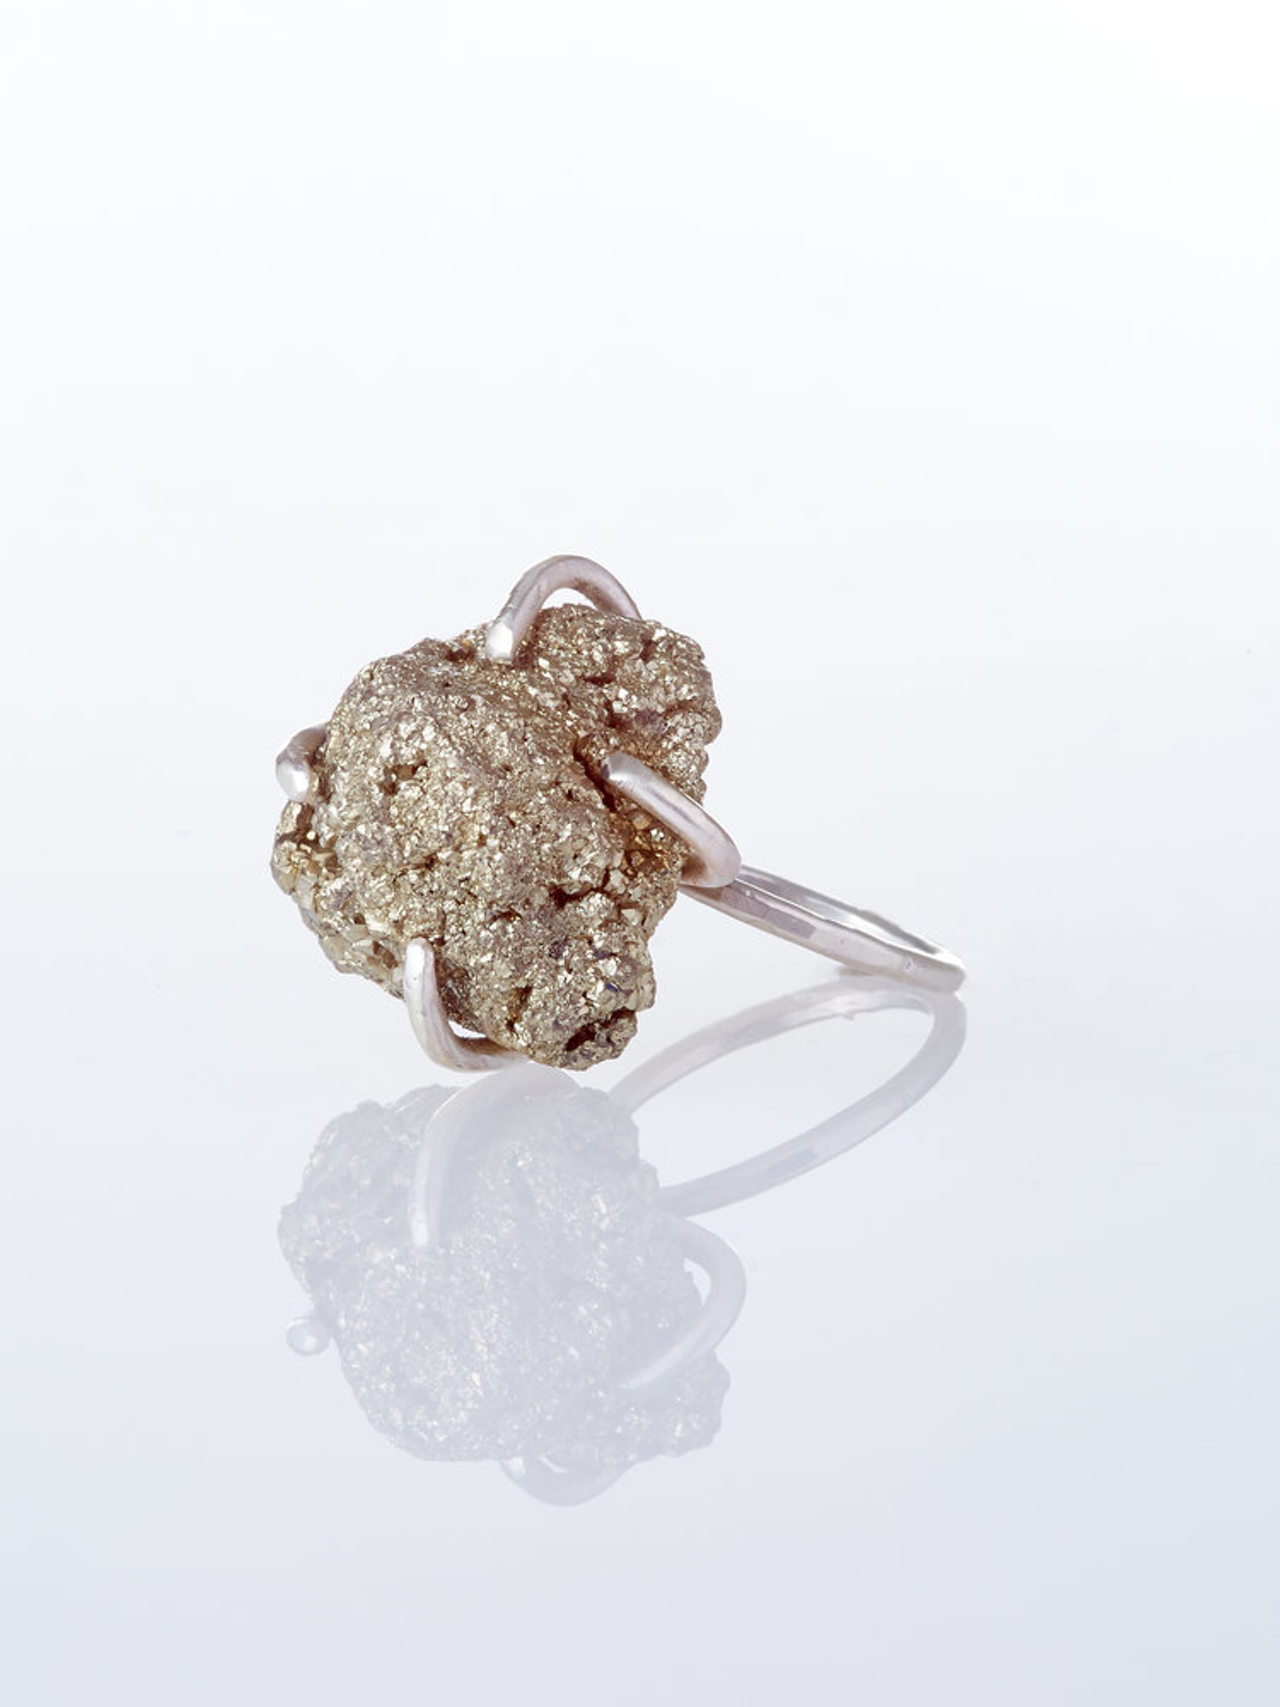 Rough pyrite cocktail ring